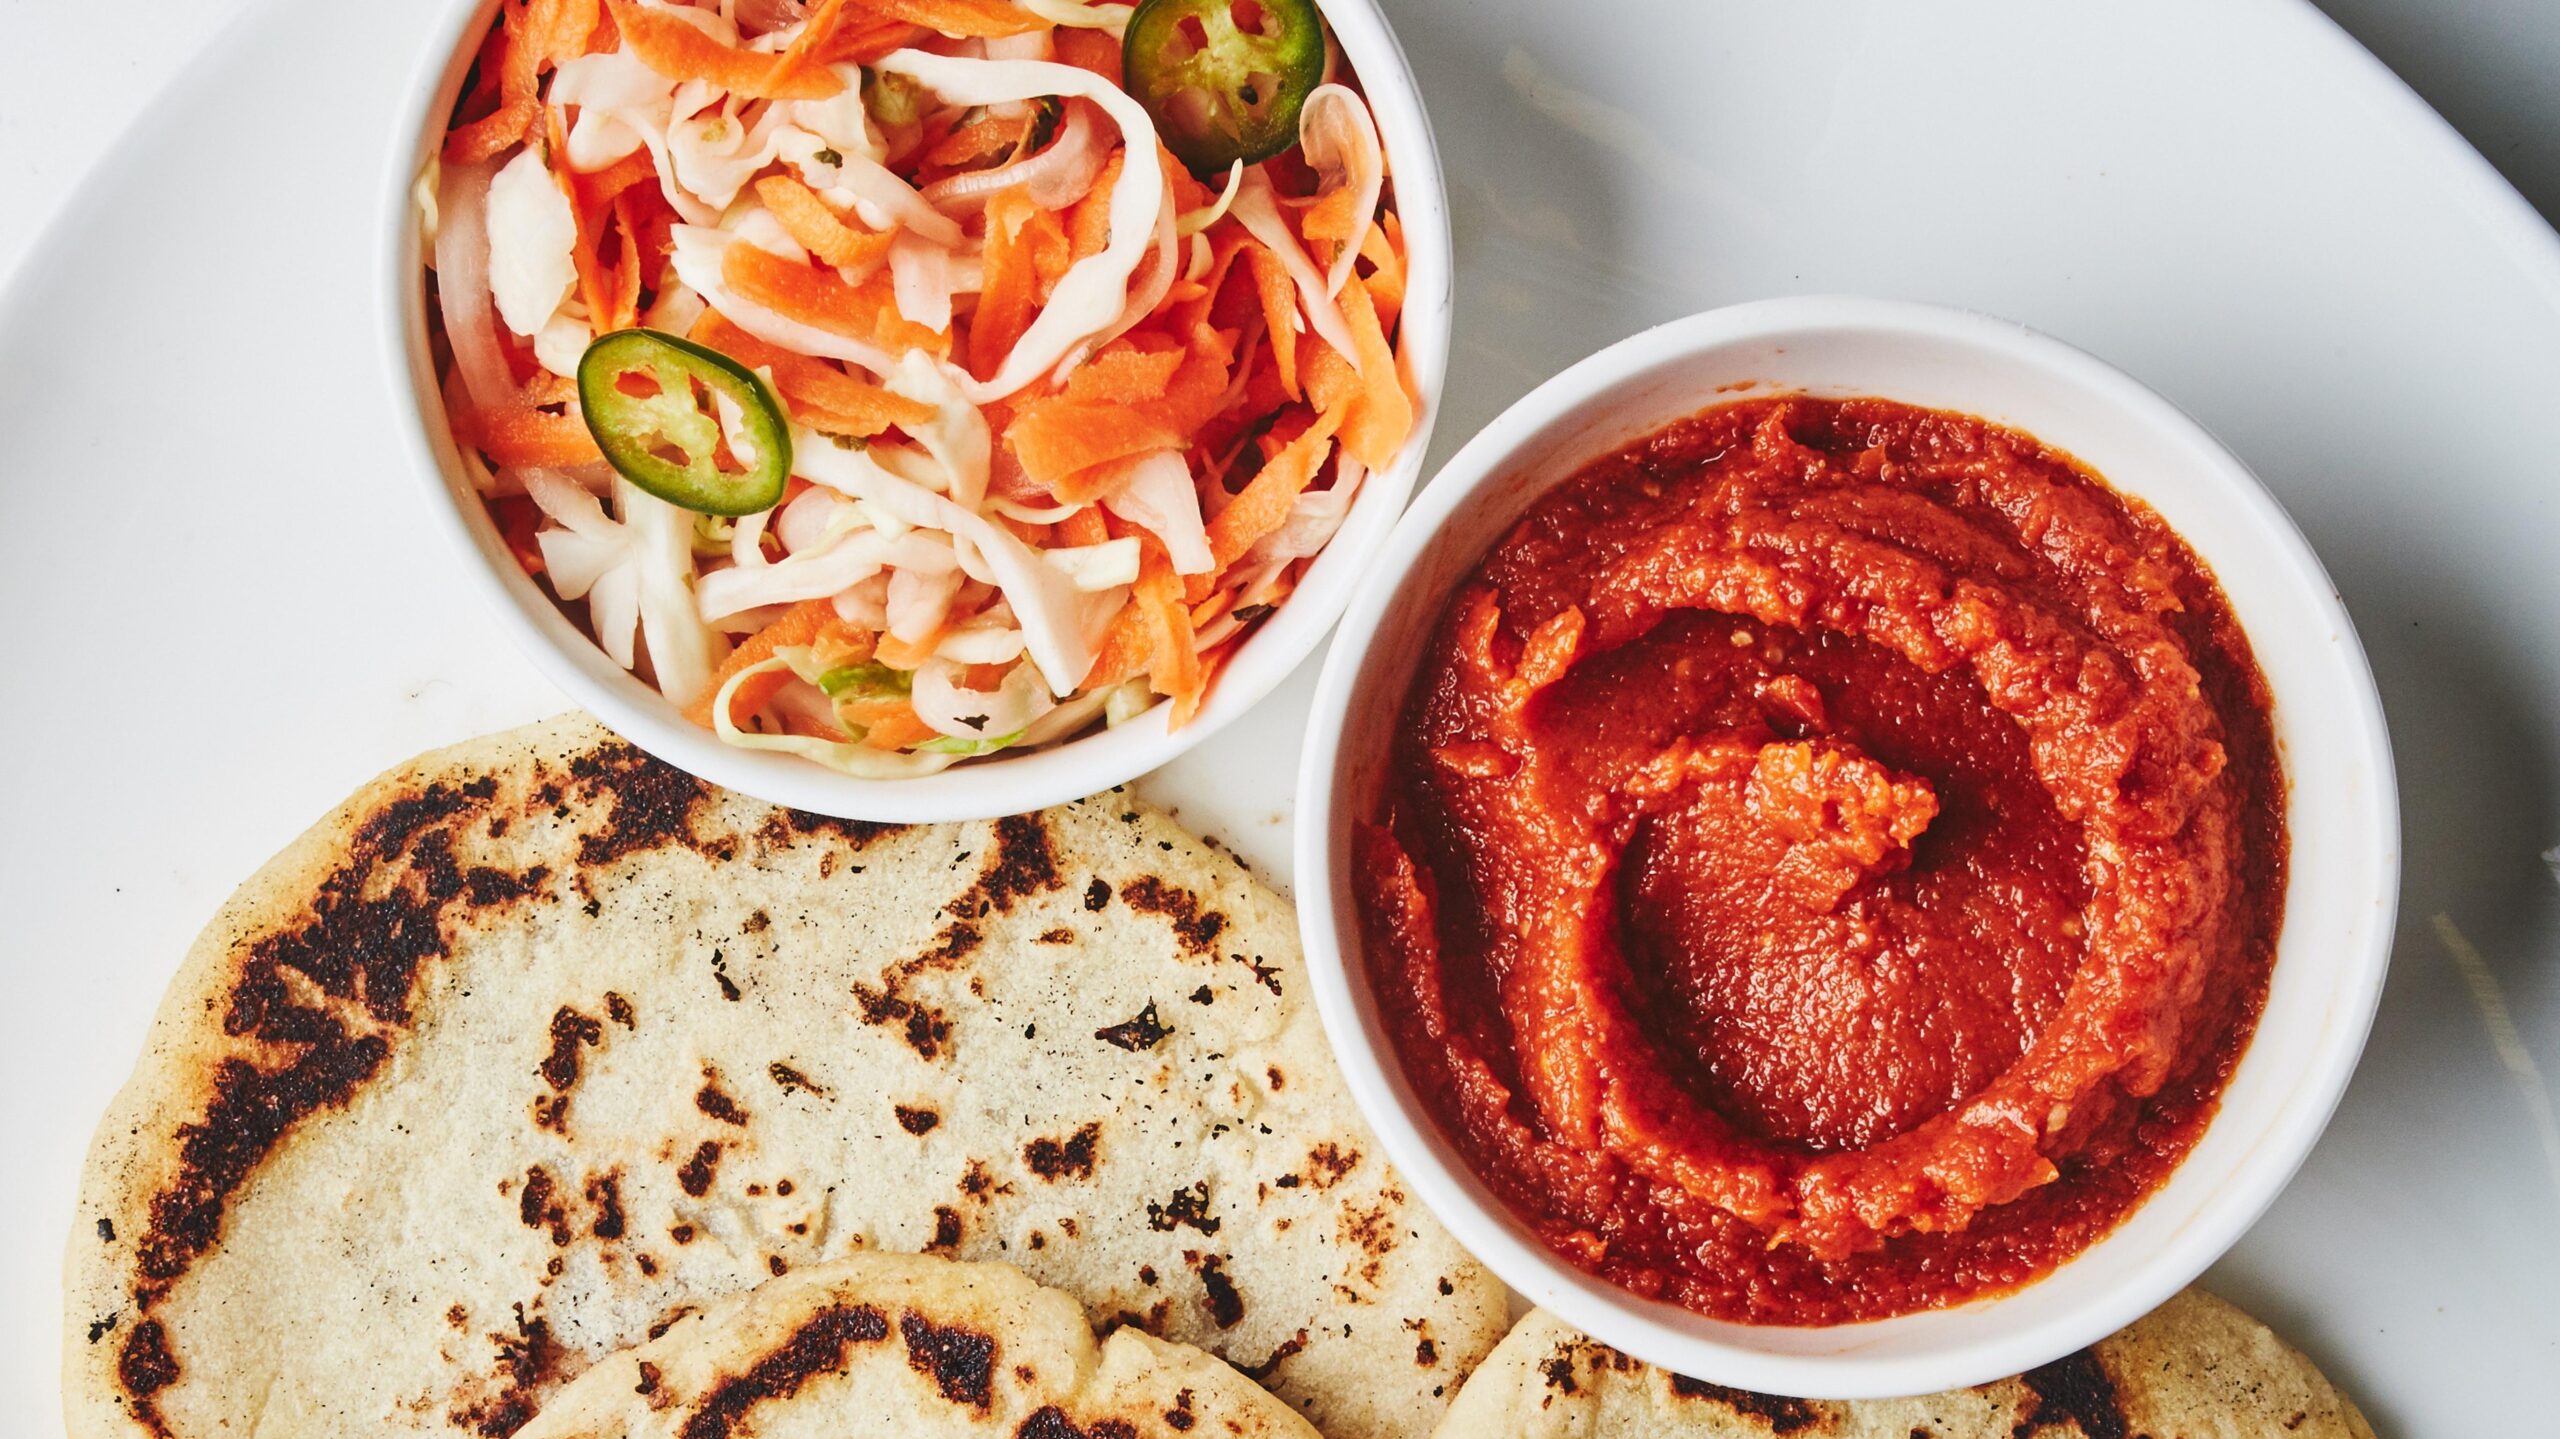  Say goodbye to boring store-bought salsa and hello to homemade goodness.